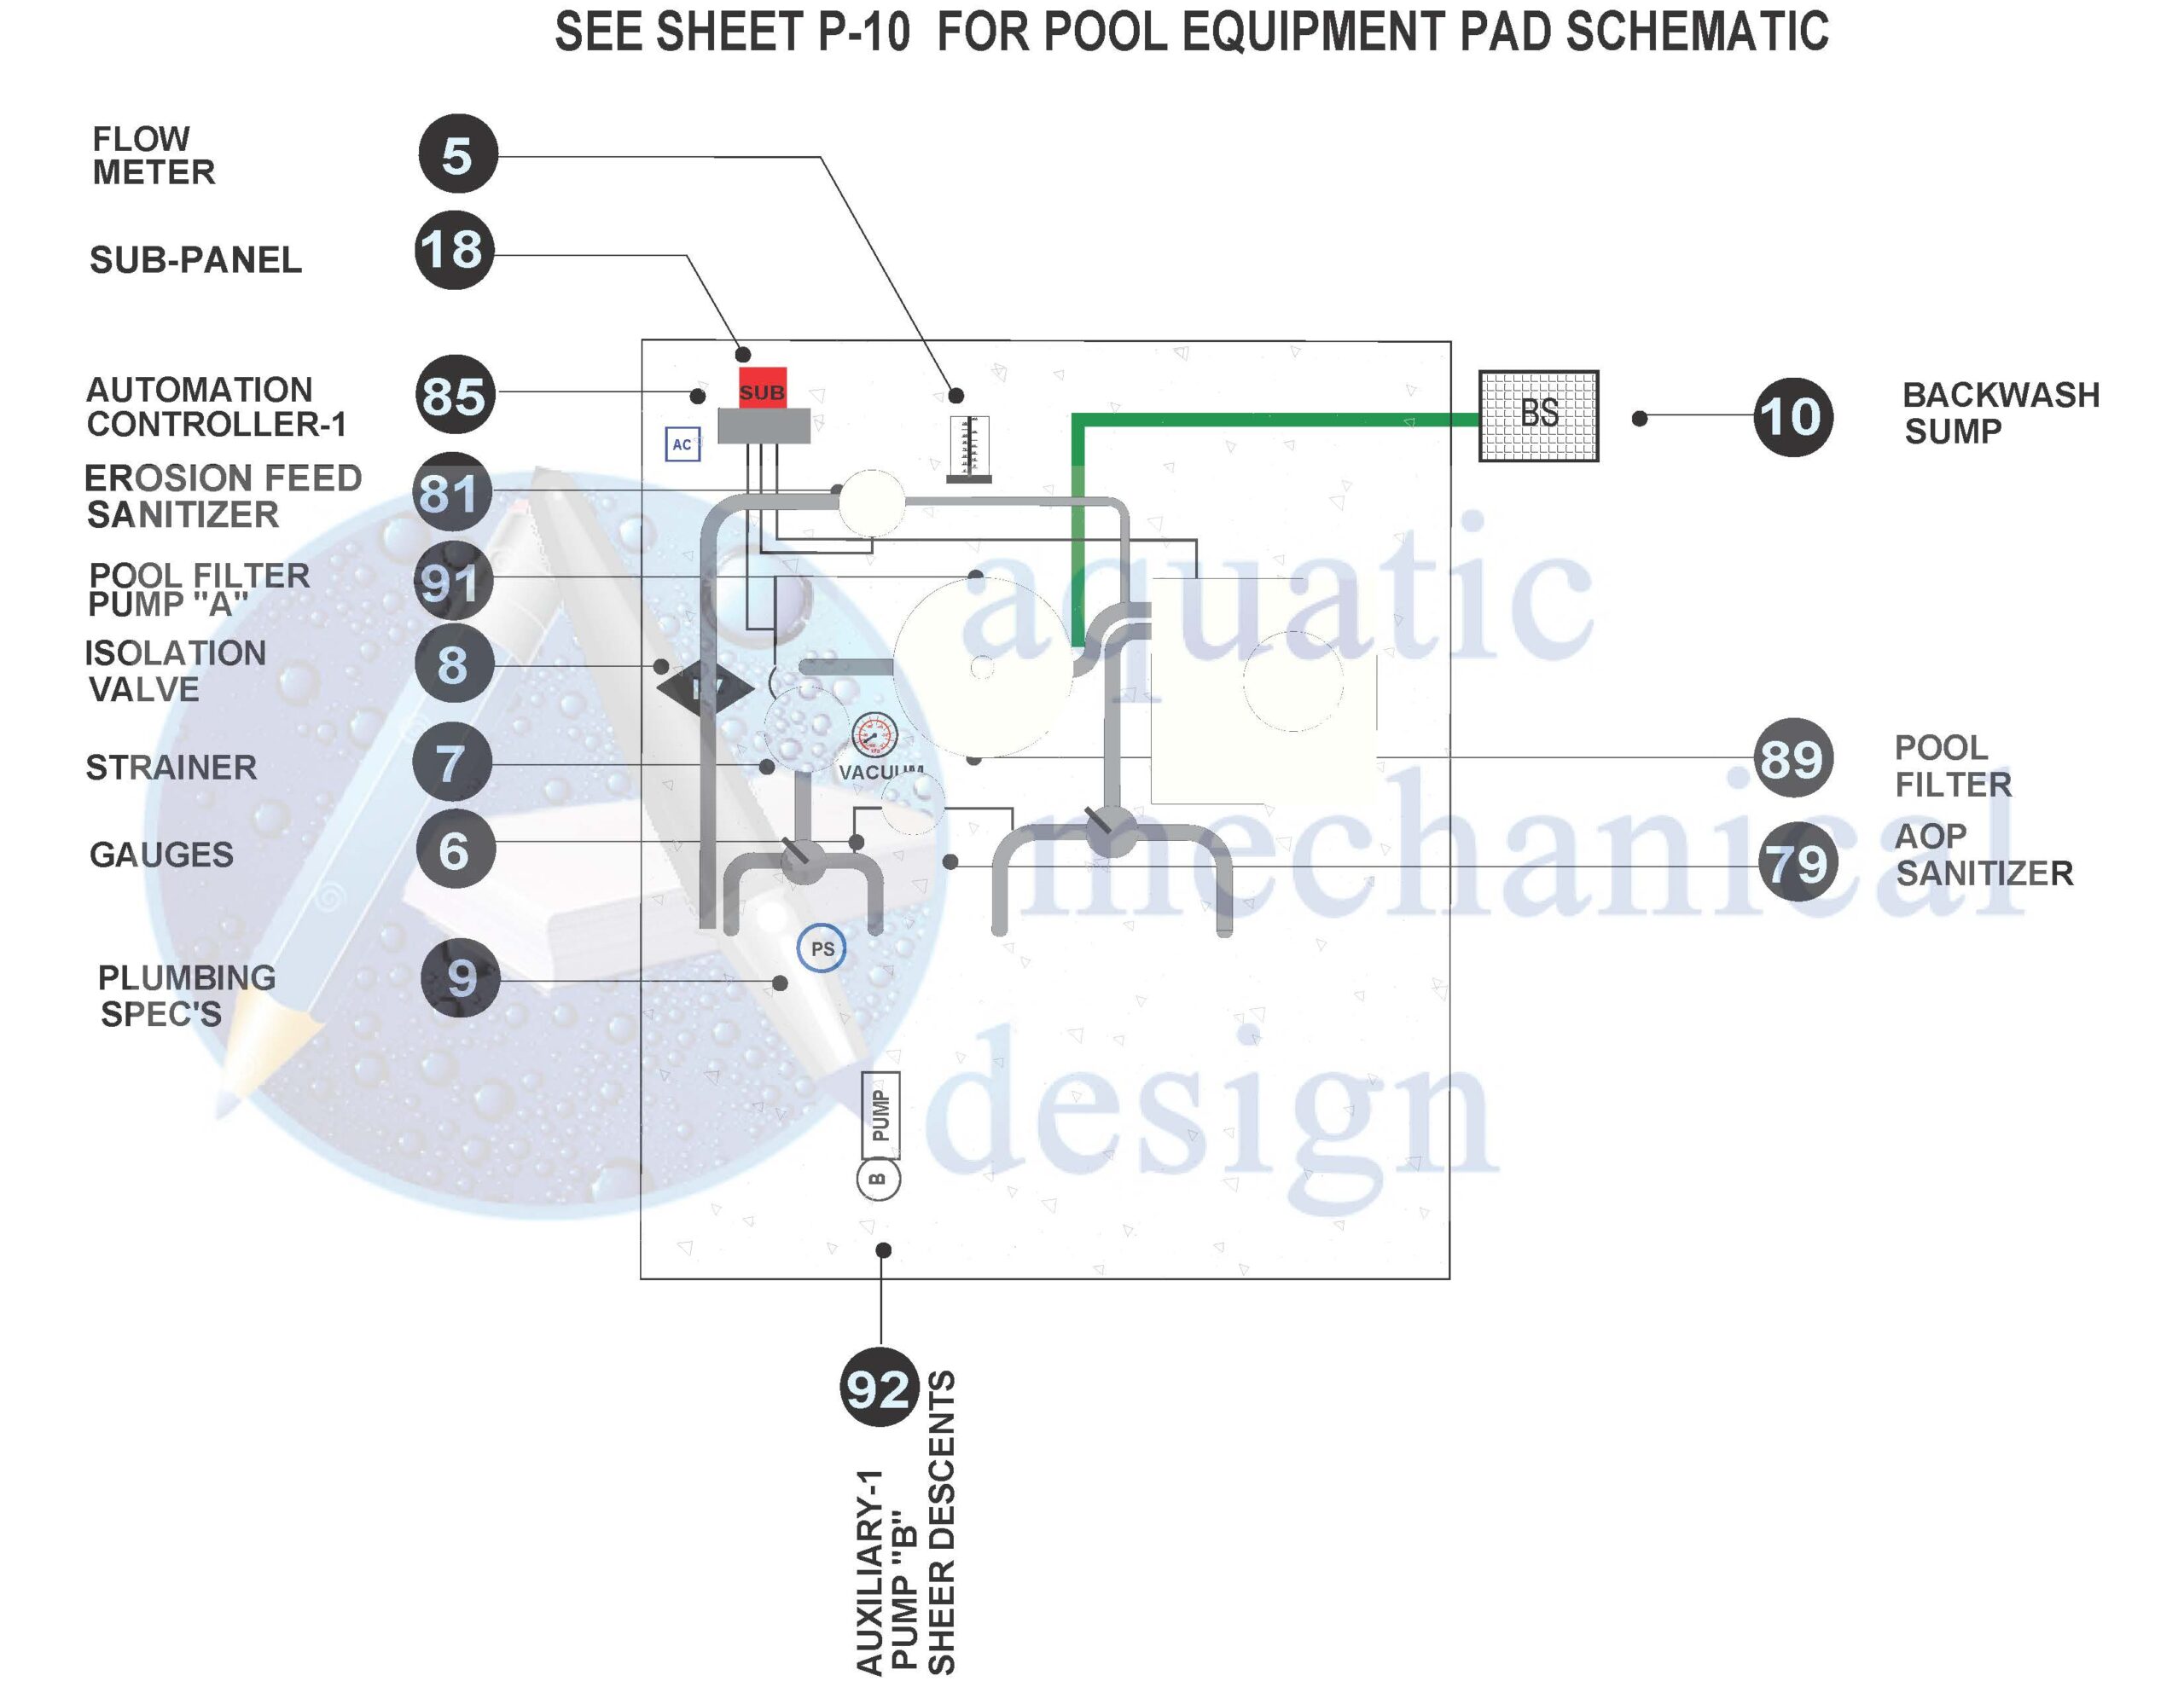 PRELIMINARY EQUIPMENT PAD LAYOUT 6-6-23